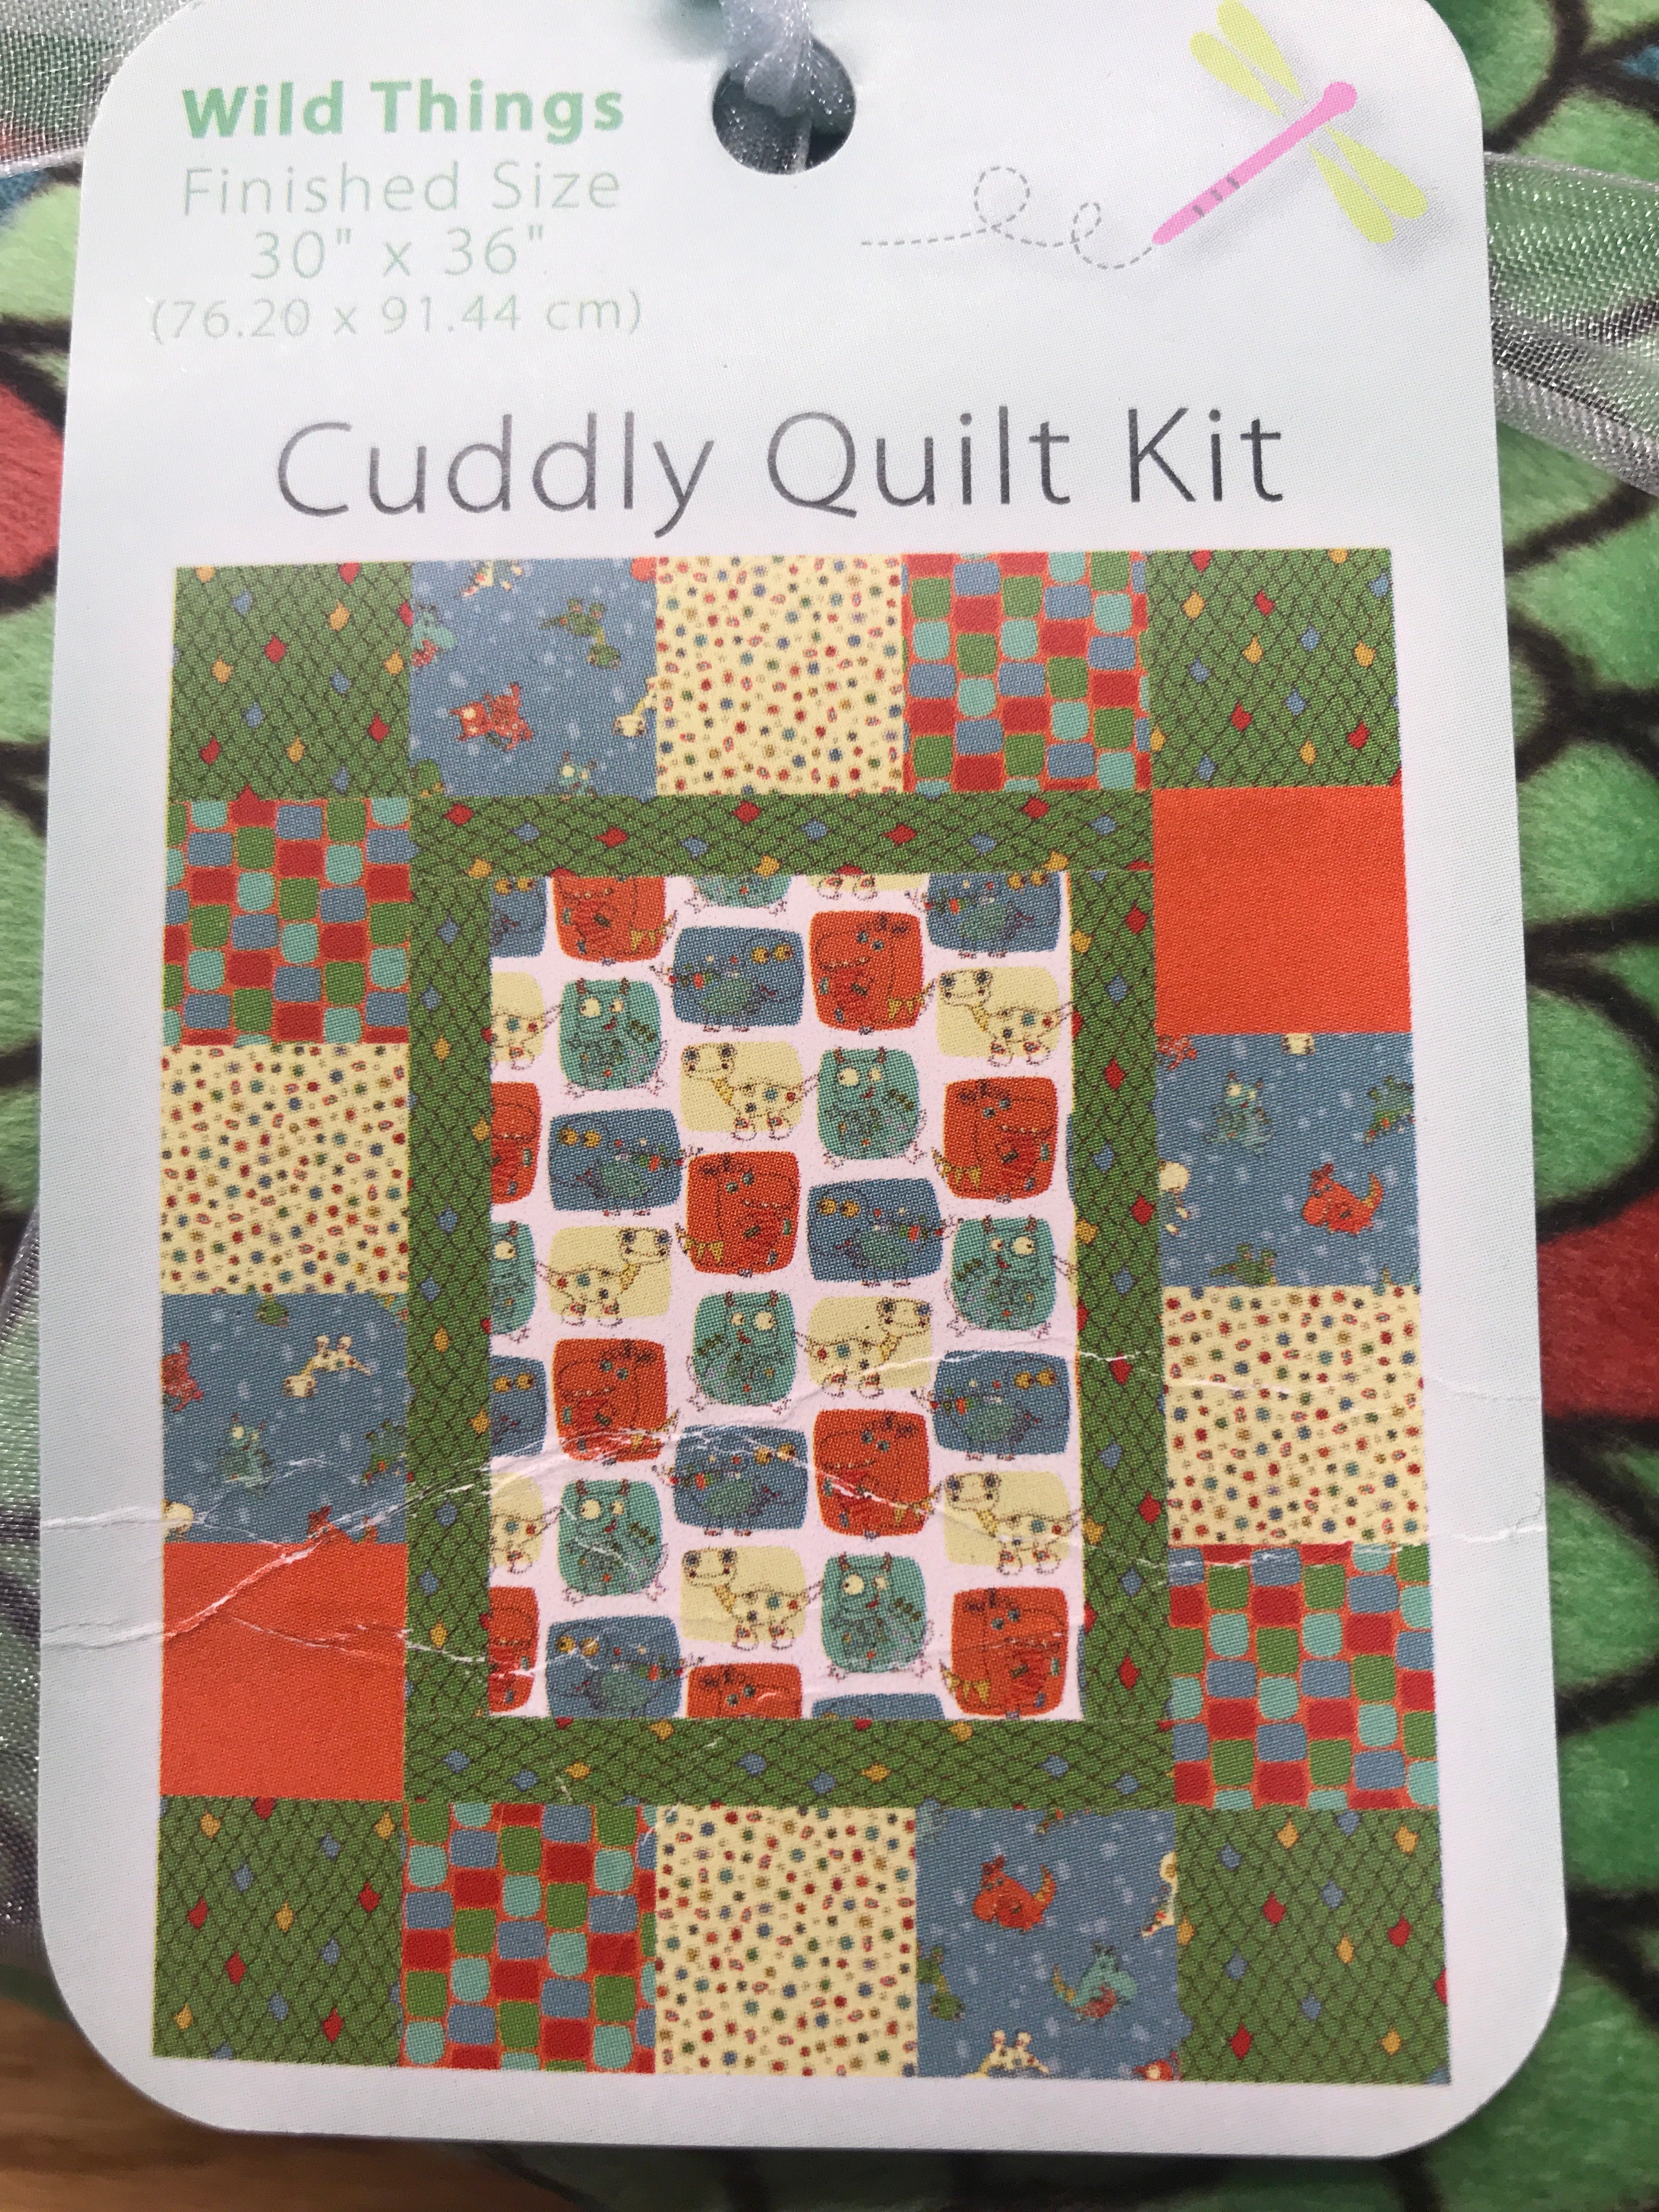 Cuddly Quilt Kit - Wild Things - 9420004 - 30" x 36"